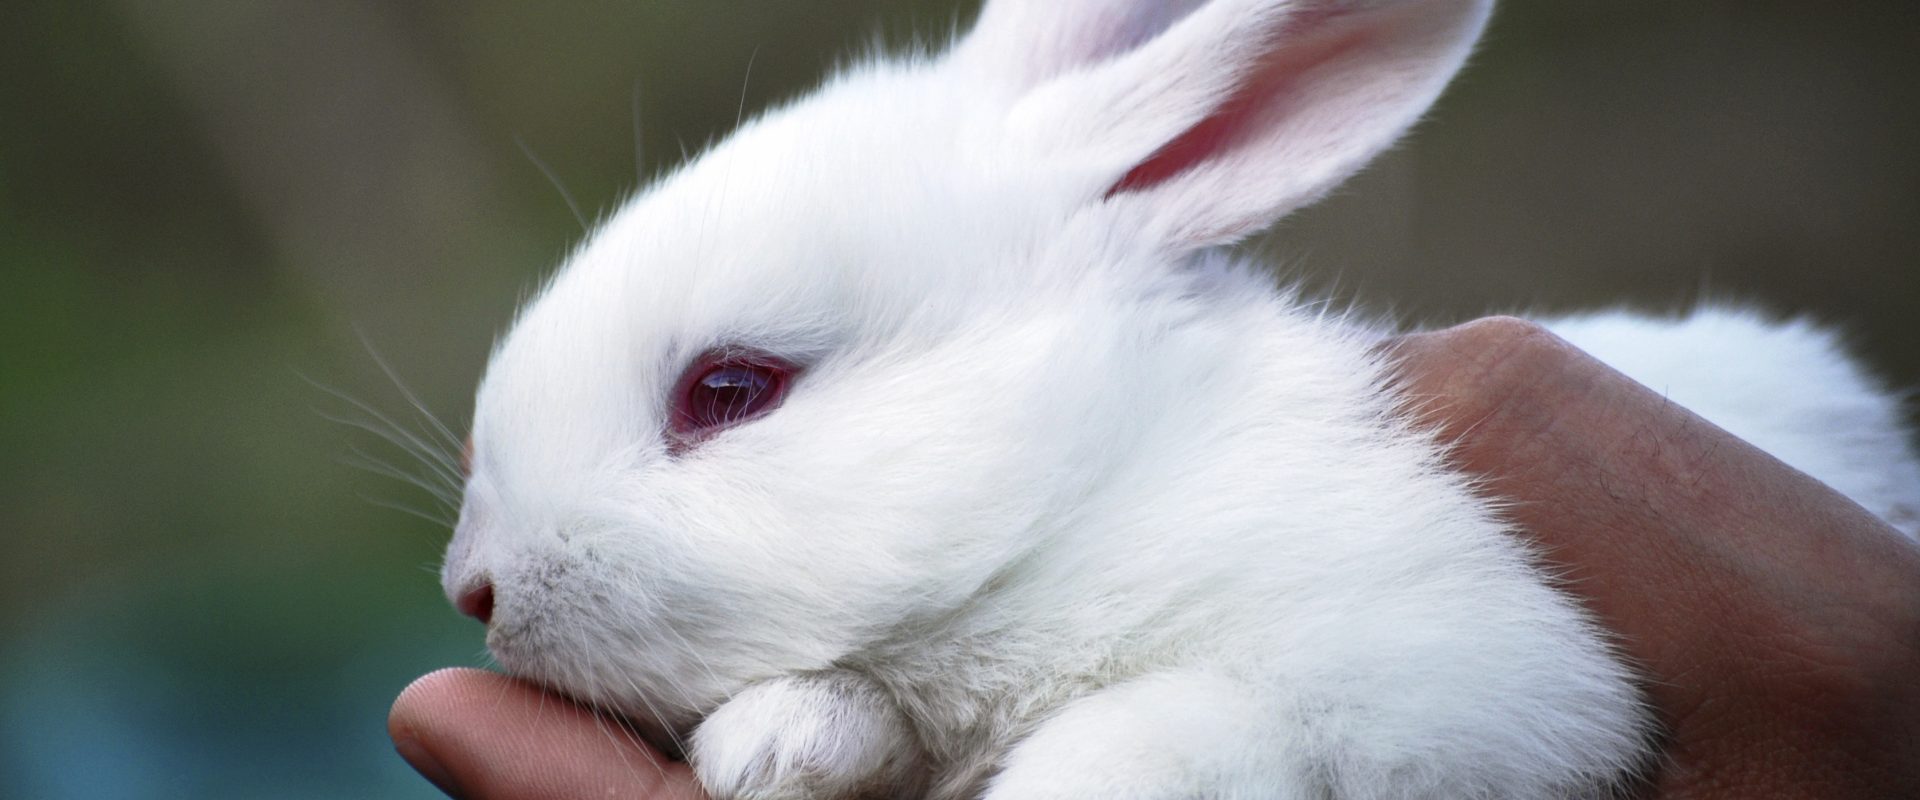 Pledge to choose cruelty-free cosmetics and household products | Animals  Australia